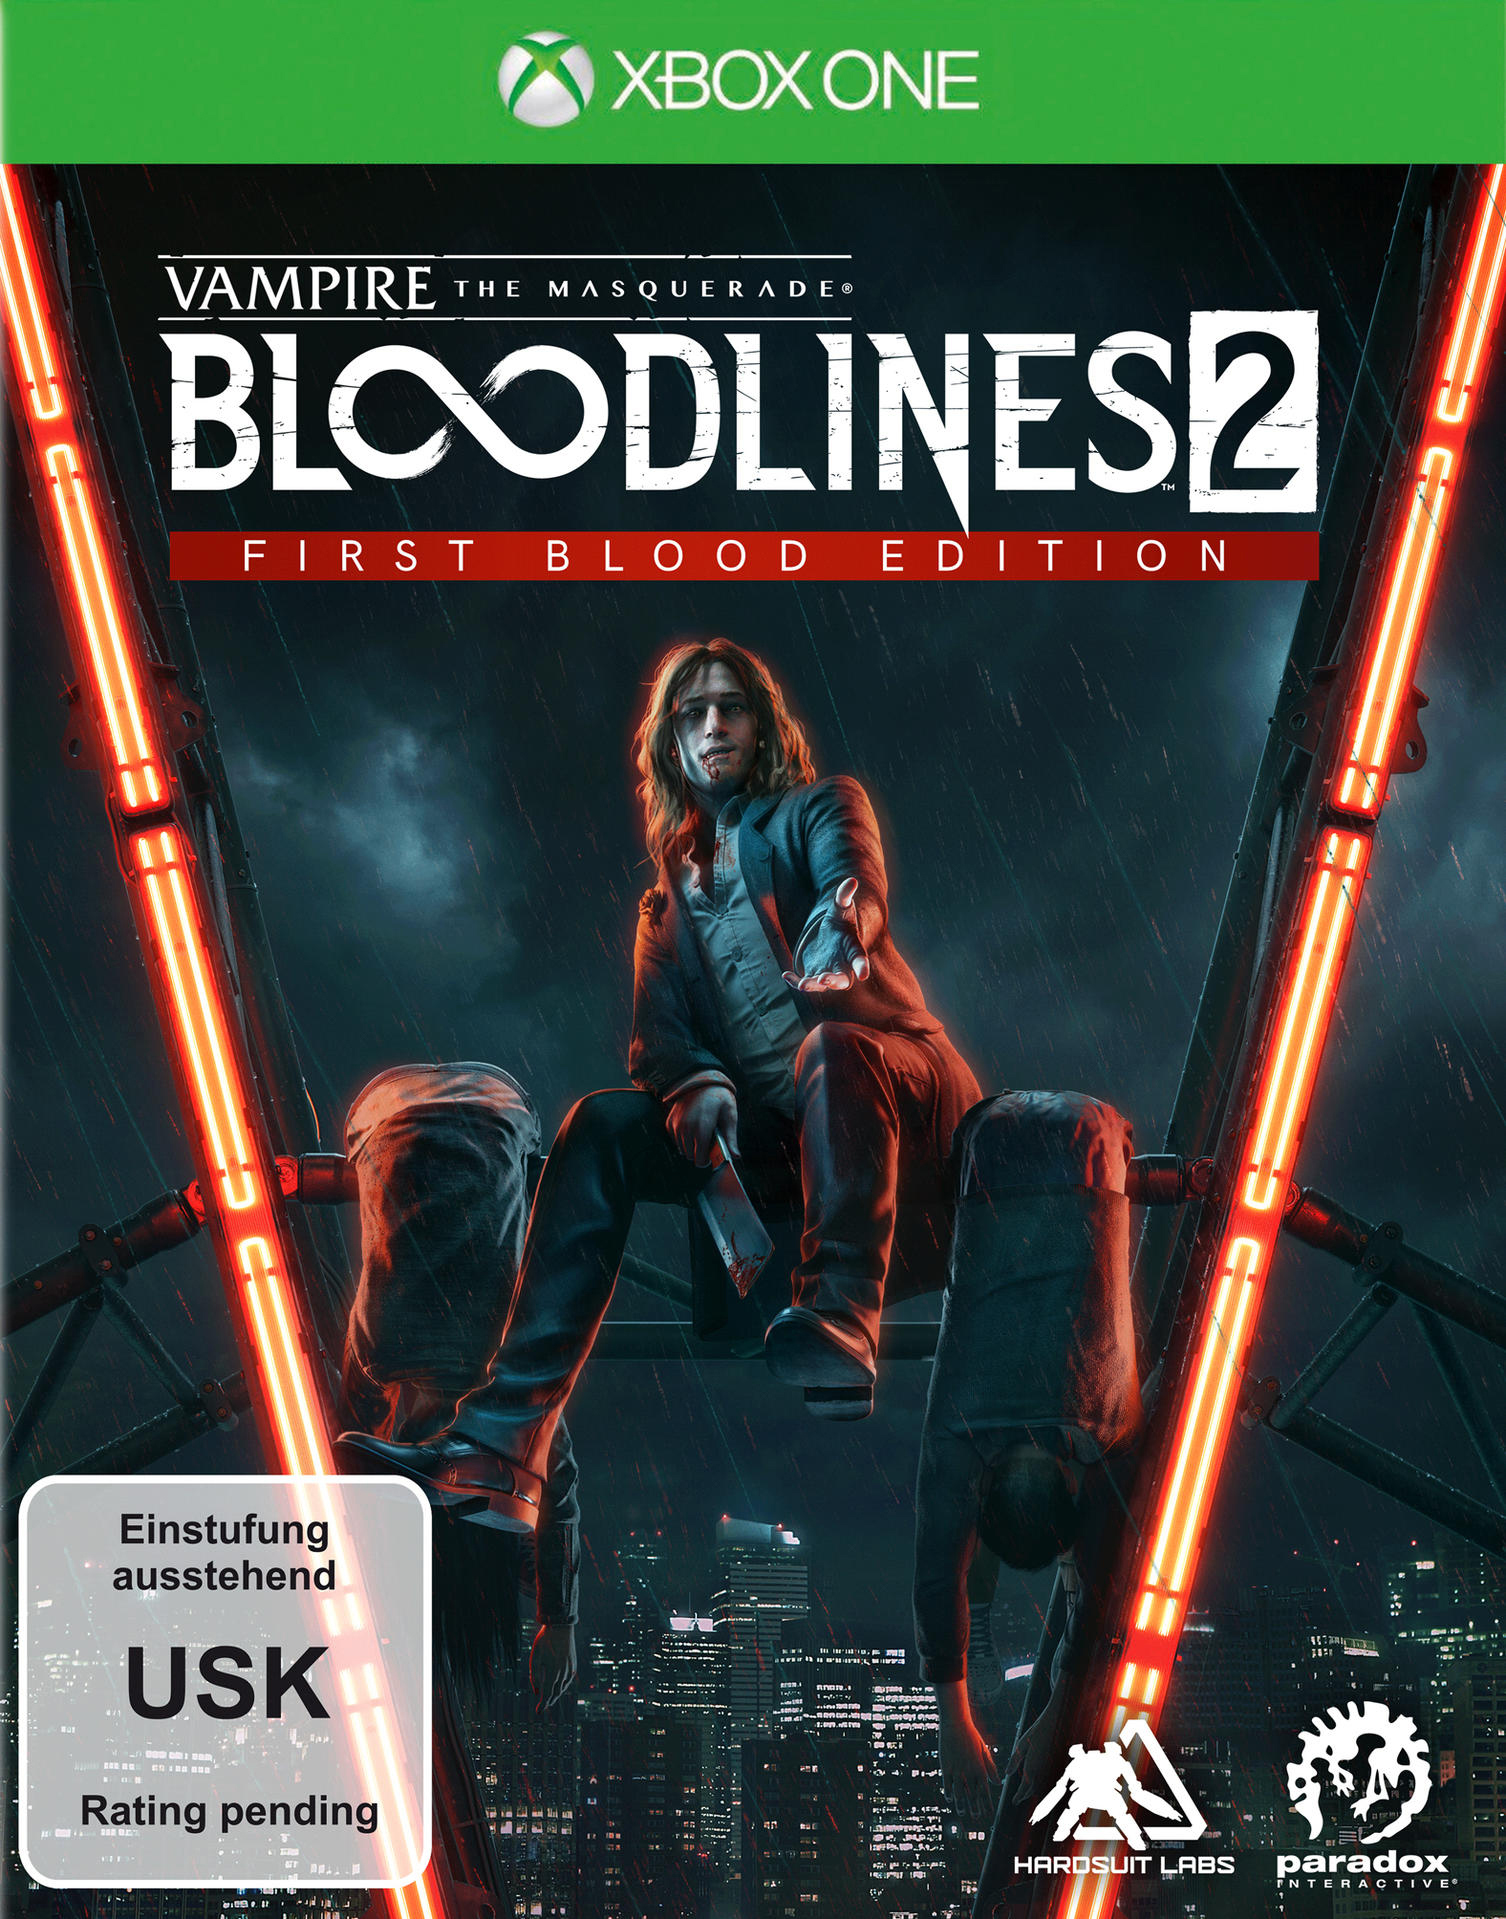 The Bloodlines Masquerade Blood - One] 2 Edition - [Xbox First Vampire: